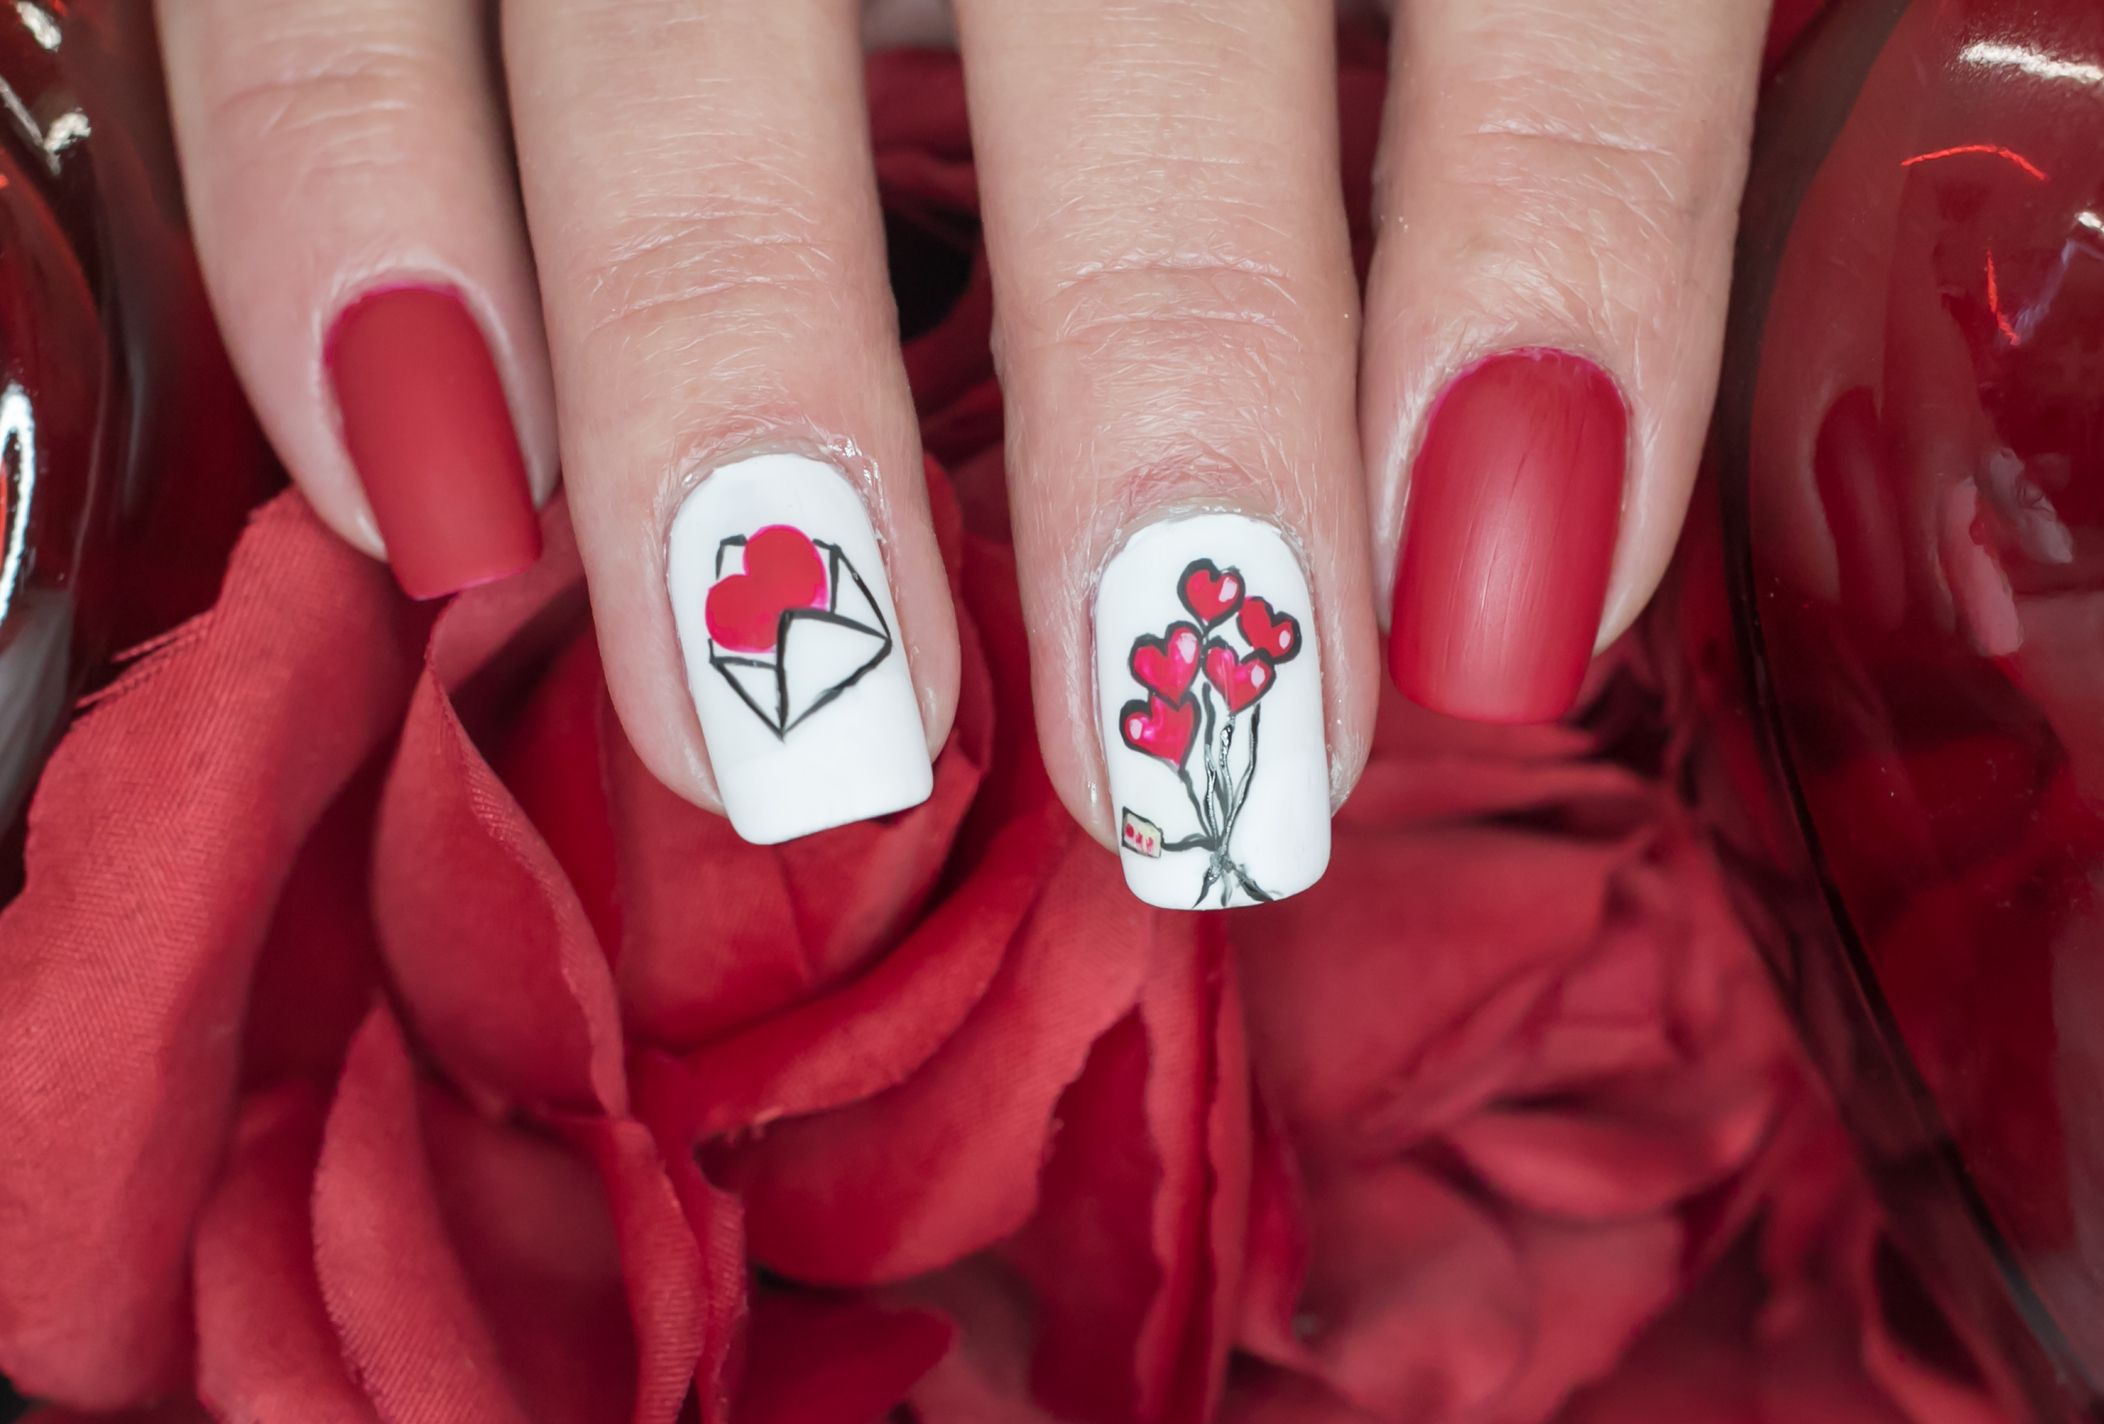 10 Non-Heart Nail Art Designs We're Crushing On For Valentine's Day -  Behindthechair.com